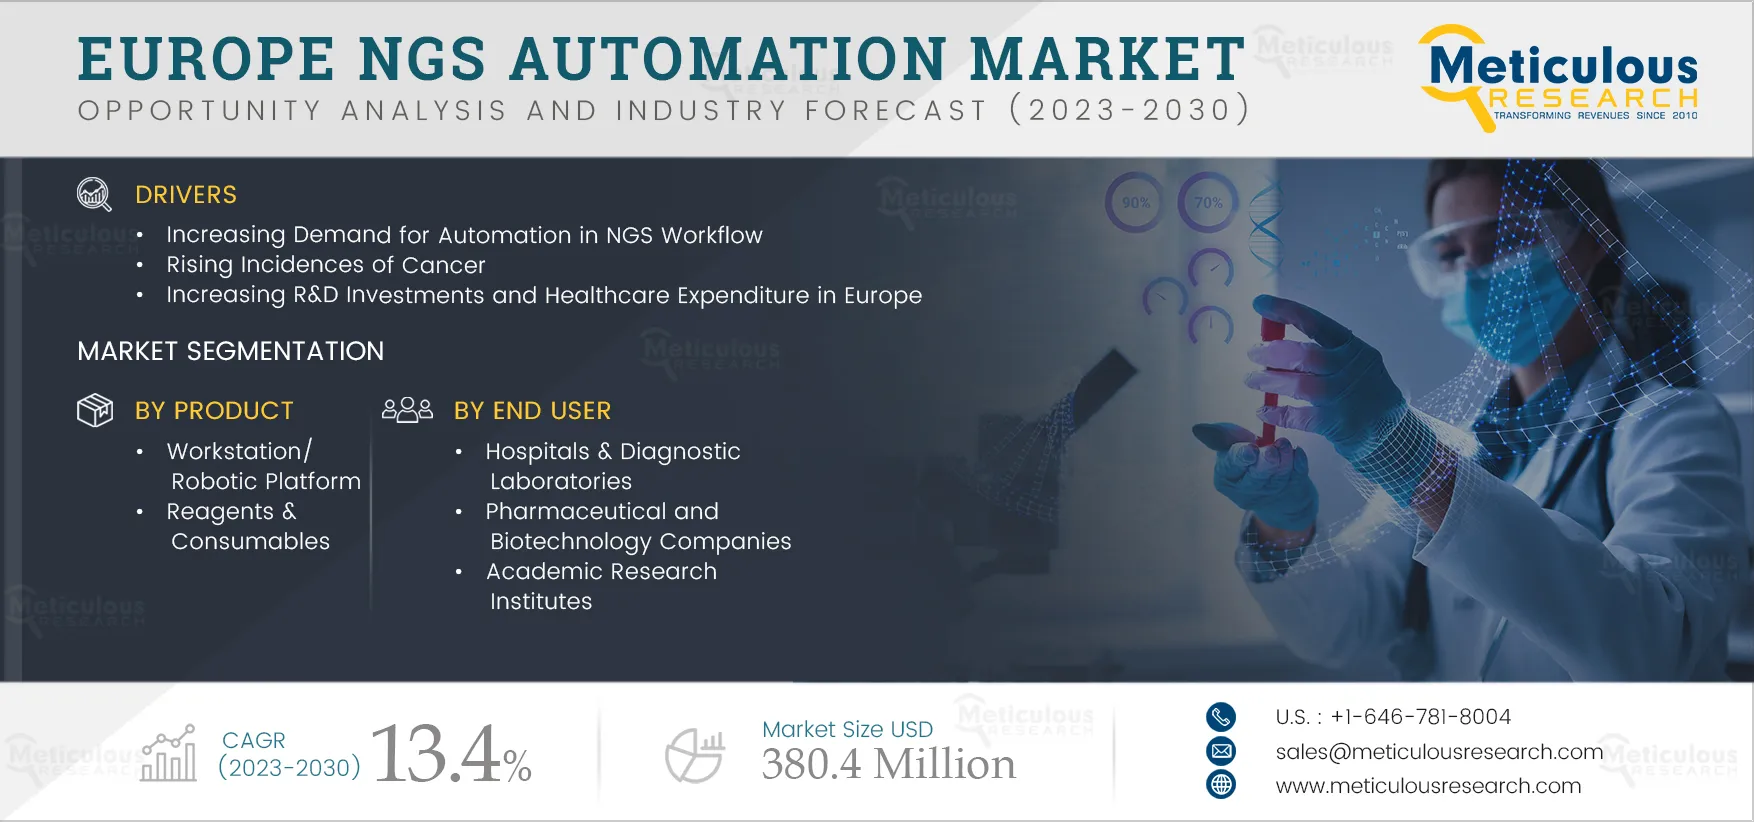 Europe NGS Automation Market